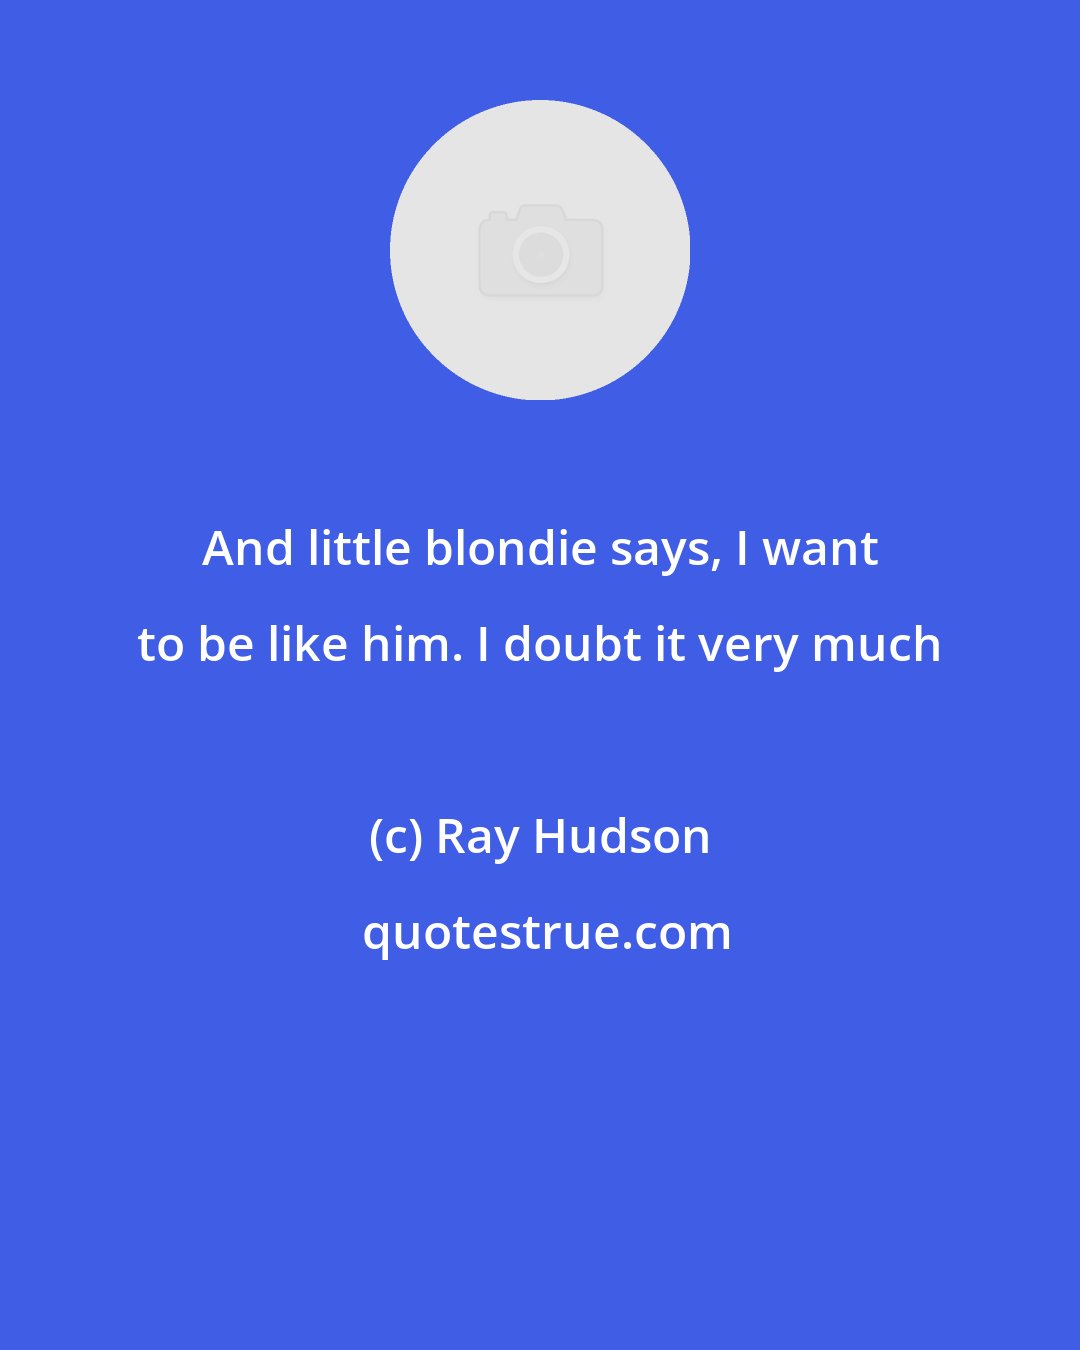 Ray Hudson: And little blondie says, I want to be like him. I doubt it very much